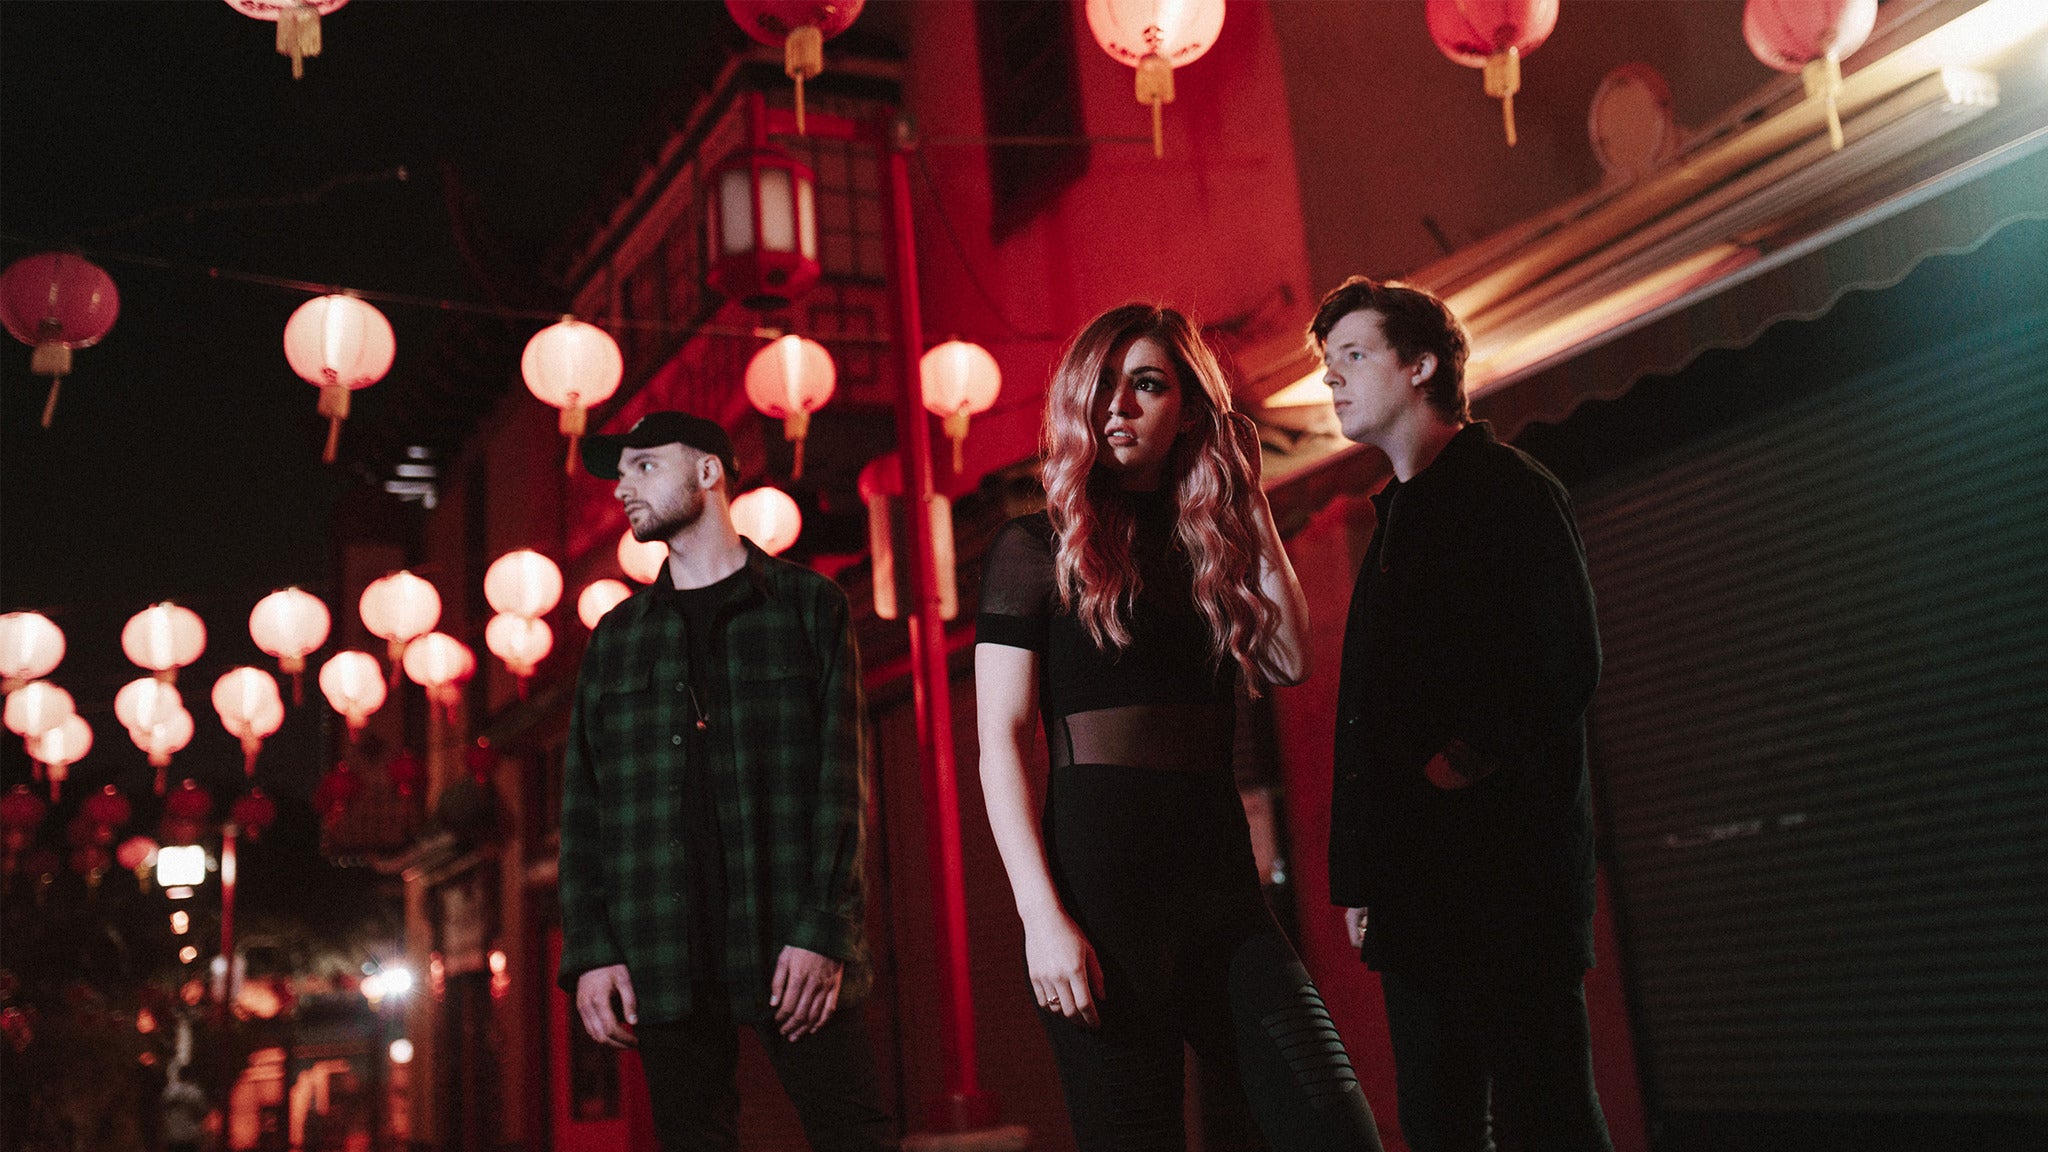 AGAINST THE CURRENT - Past Lives World Tour 2019 in New York promo photo for Live Nation presale offer code